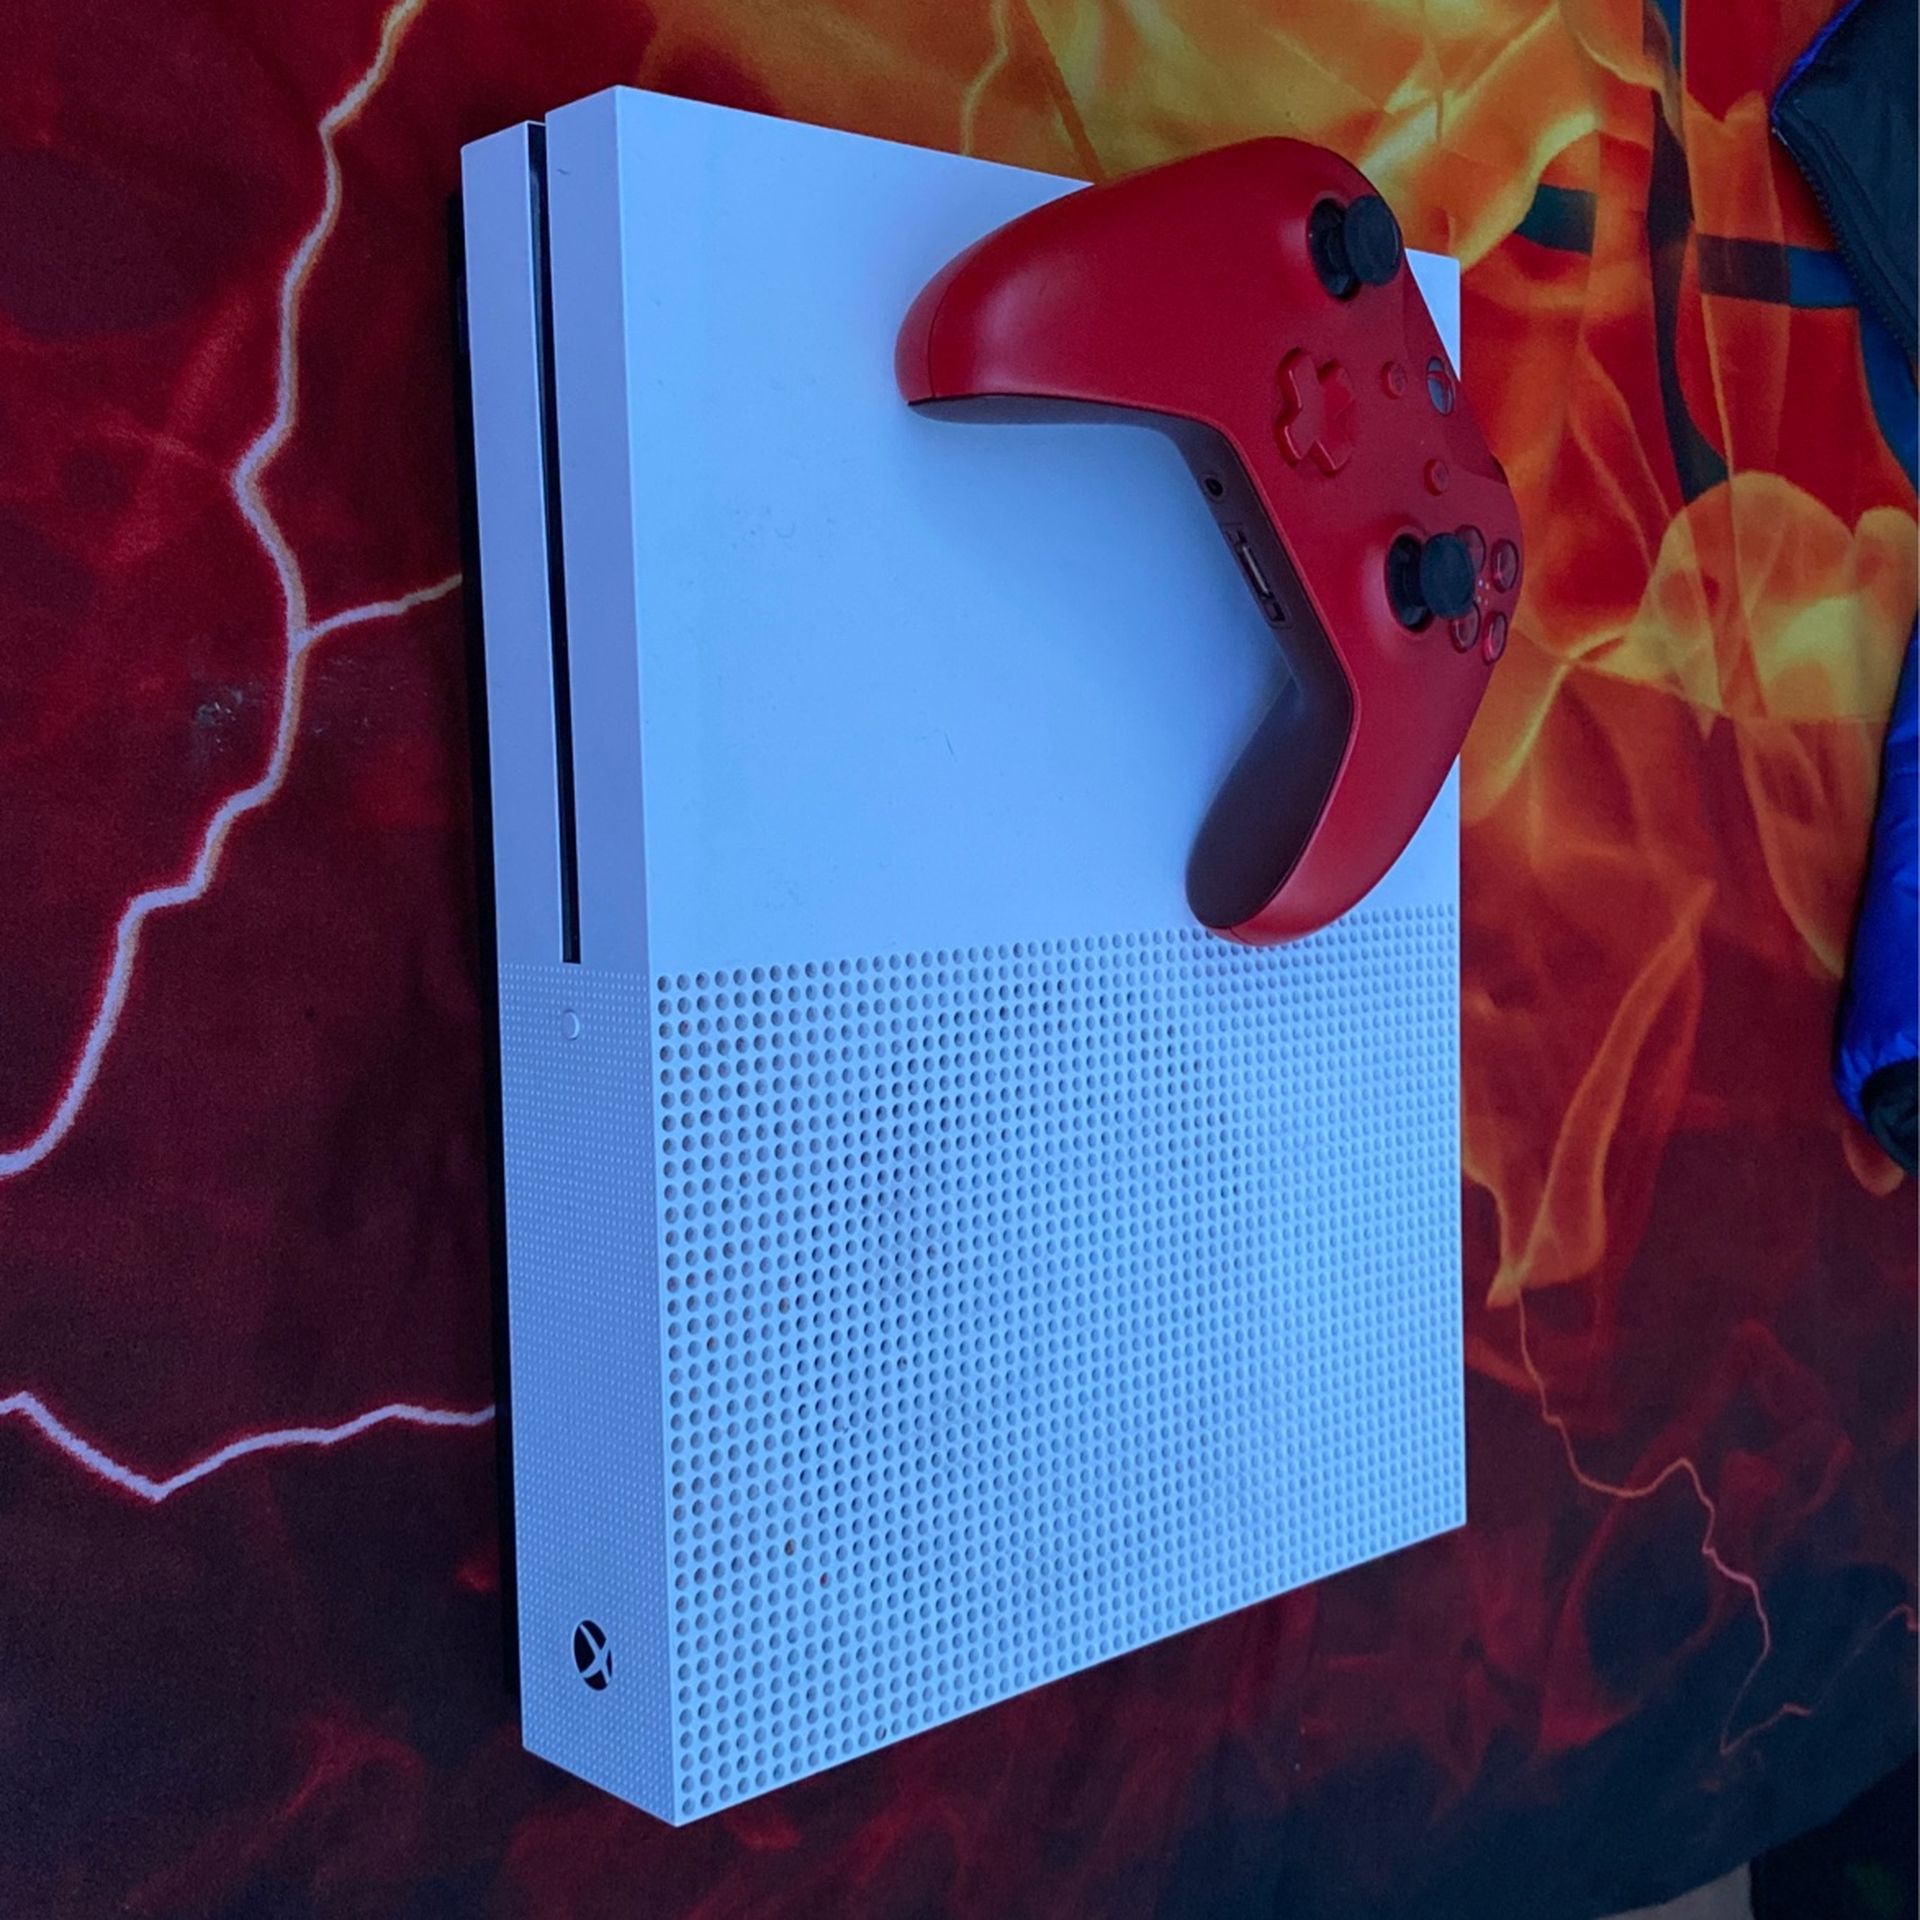 Xbox One With A Red Controller